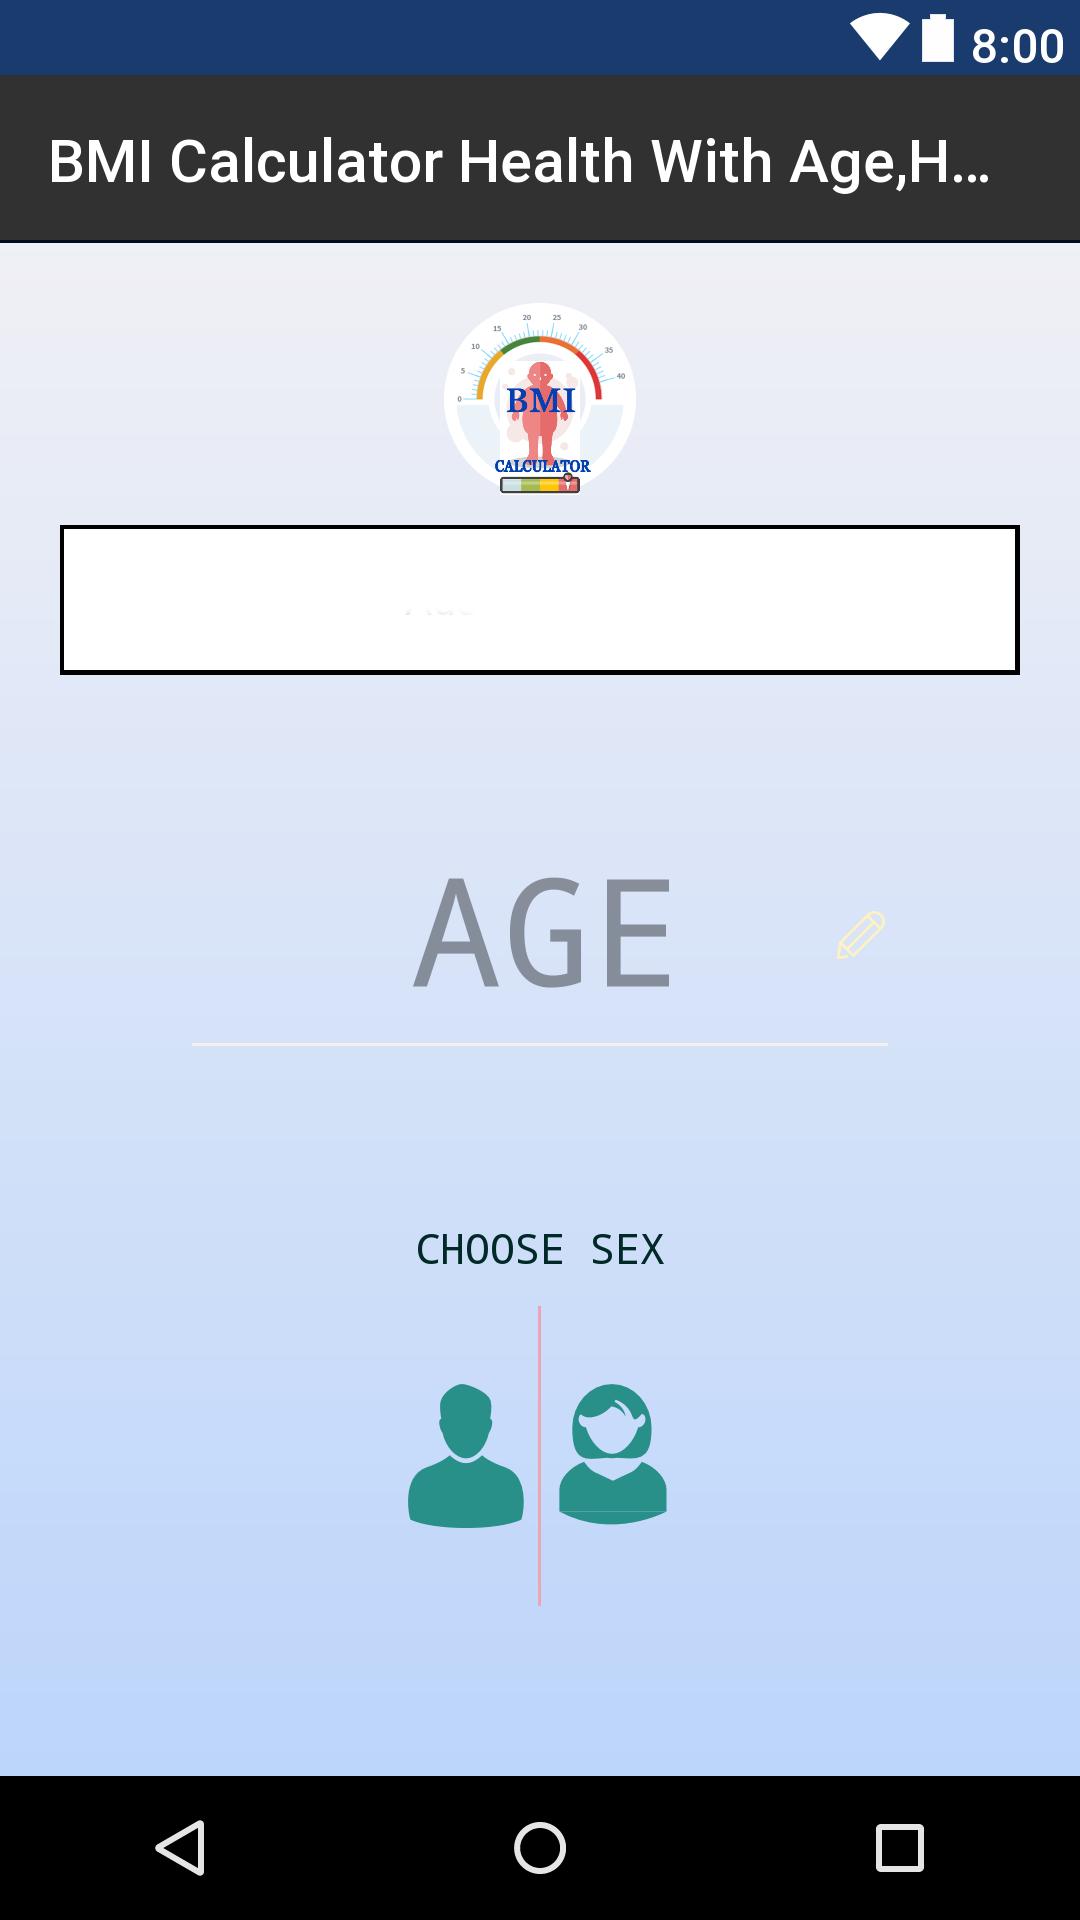 Bmi Calculator Health With Age Height For Android Apk Download